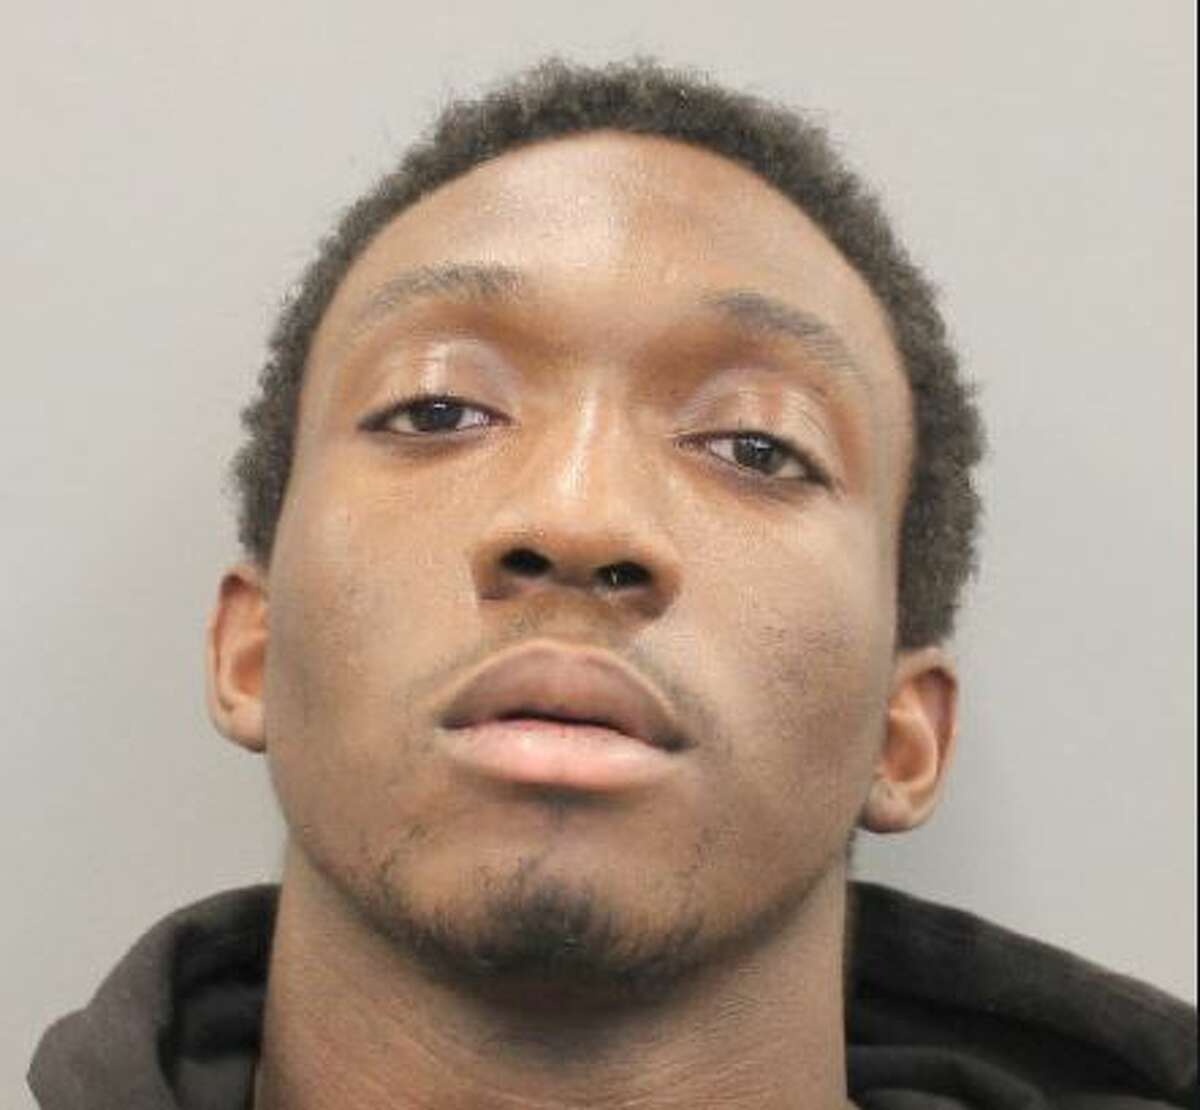 Chiedozie Amadi, 22, is charged with murder.